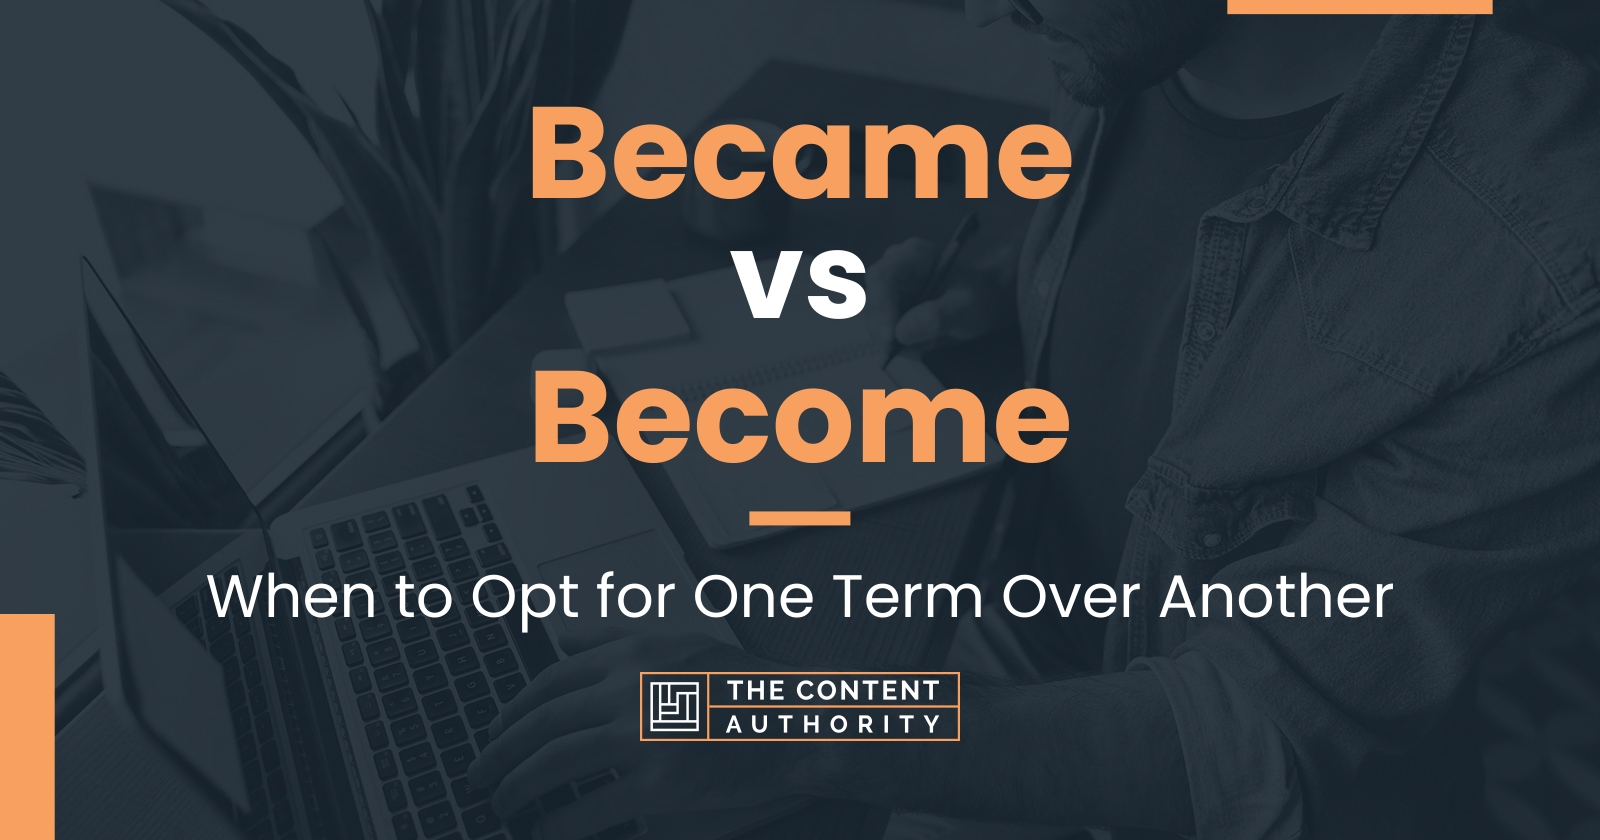 Became vs Become: When to Opt for One Term Over Another